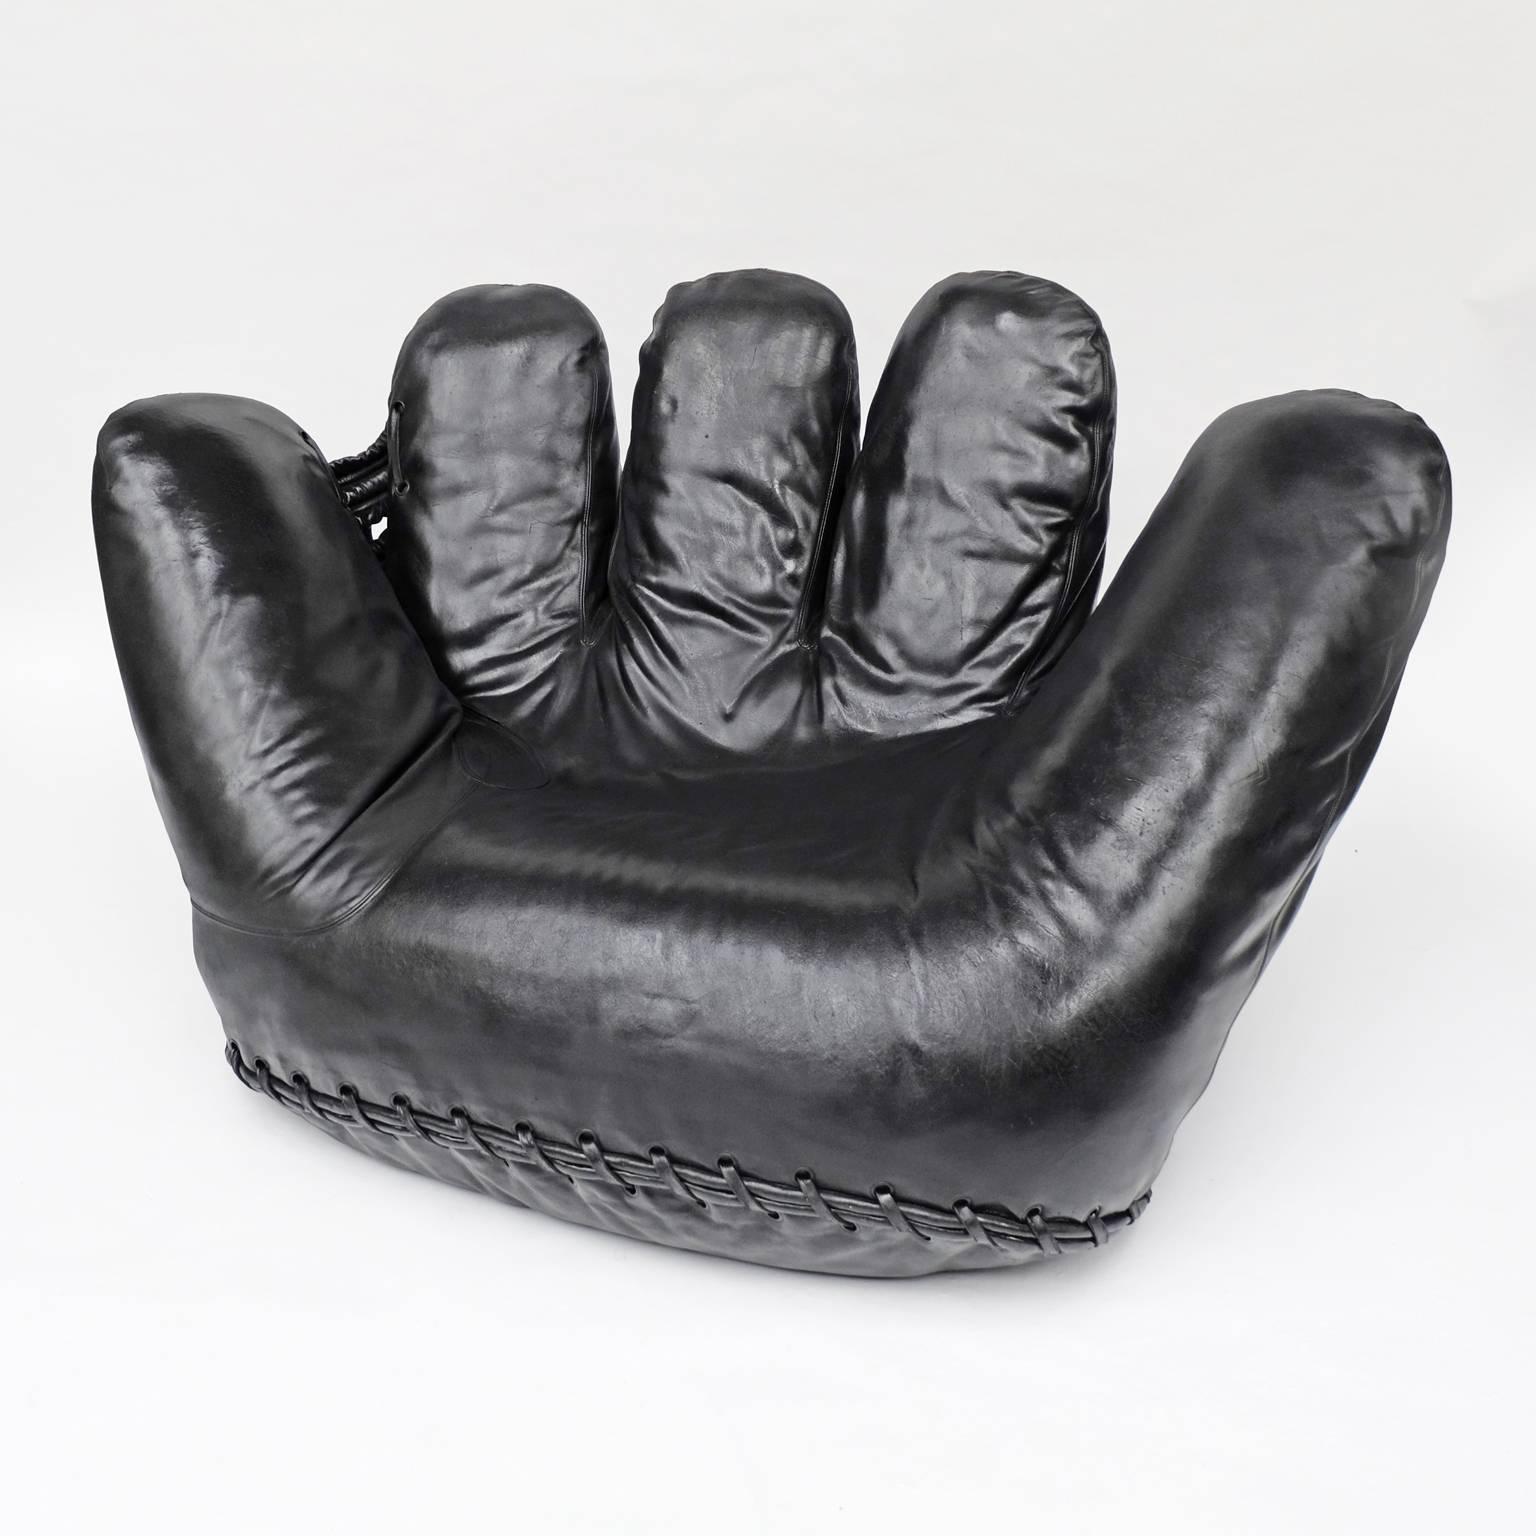 Baseball glove seat designed by Jonathan de Pas, Donato D'urbino and Paolo Lomazzi for Poltronova, Italy, 1970. 

Polyurethane foam construction upholstered in black leather with four castors, 1970s edition. 

Measures: H 86 cm x L 167 cm x D